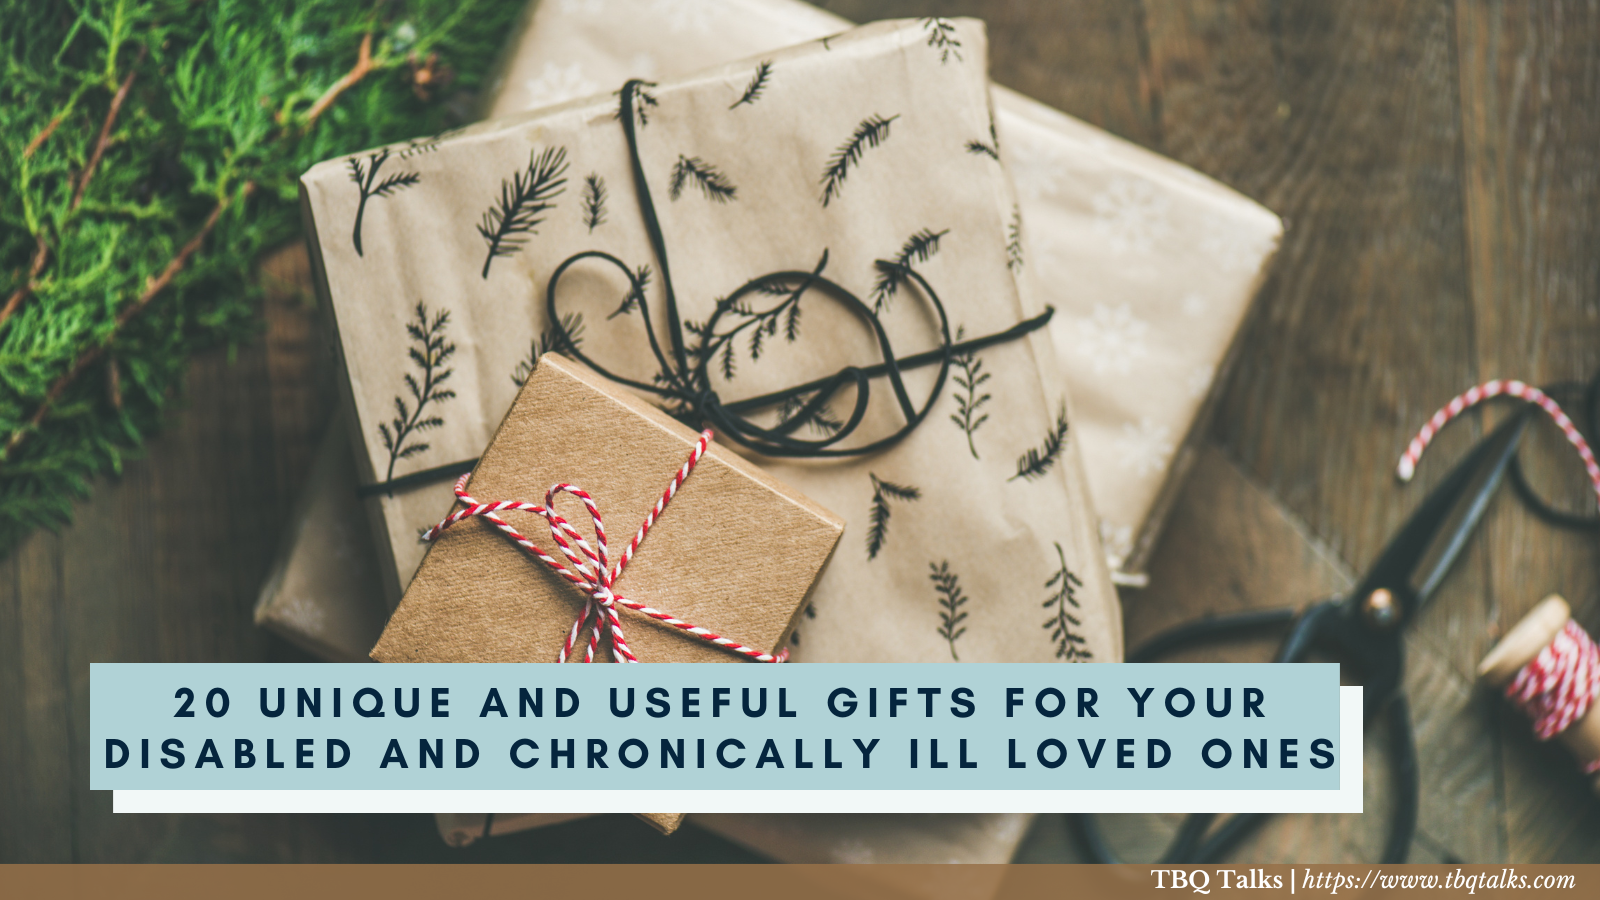 20 Unique and Useful Gifts for Your Disabled and Chronically Ill Loved Ones